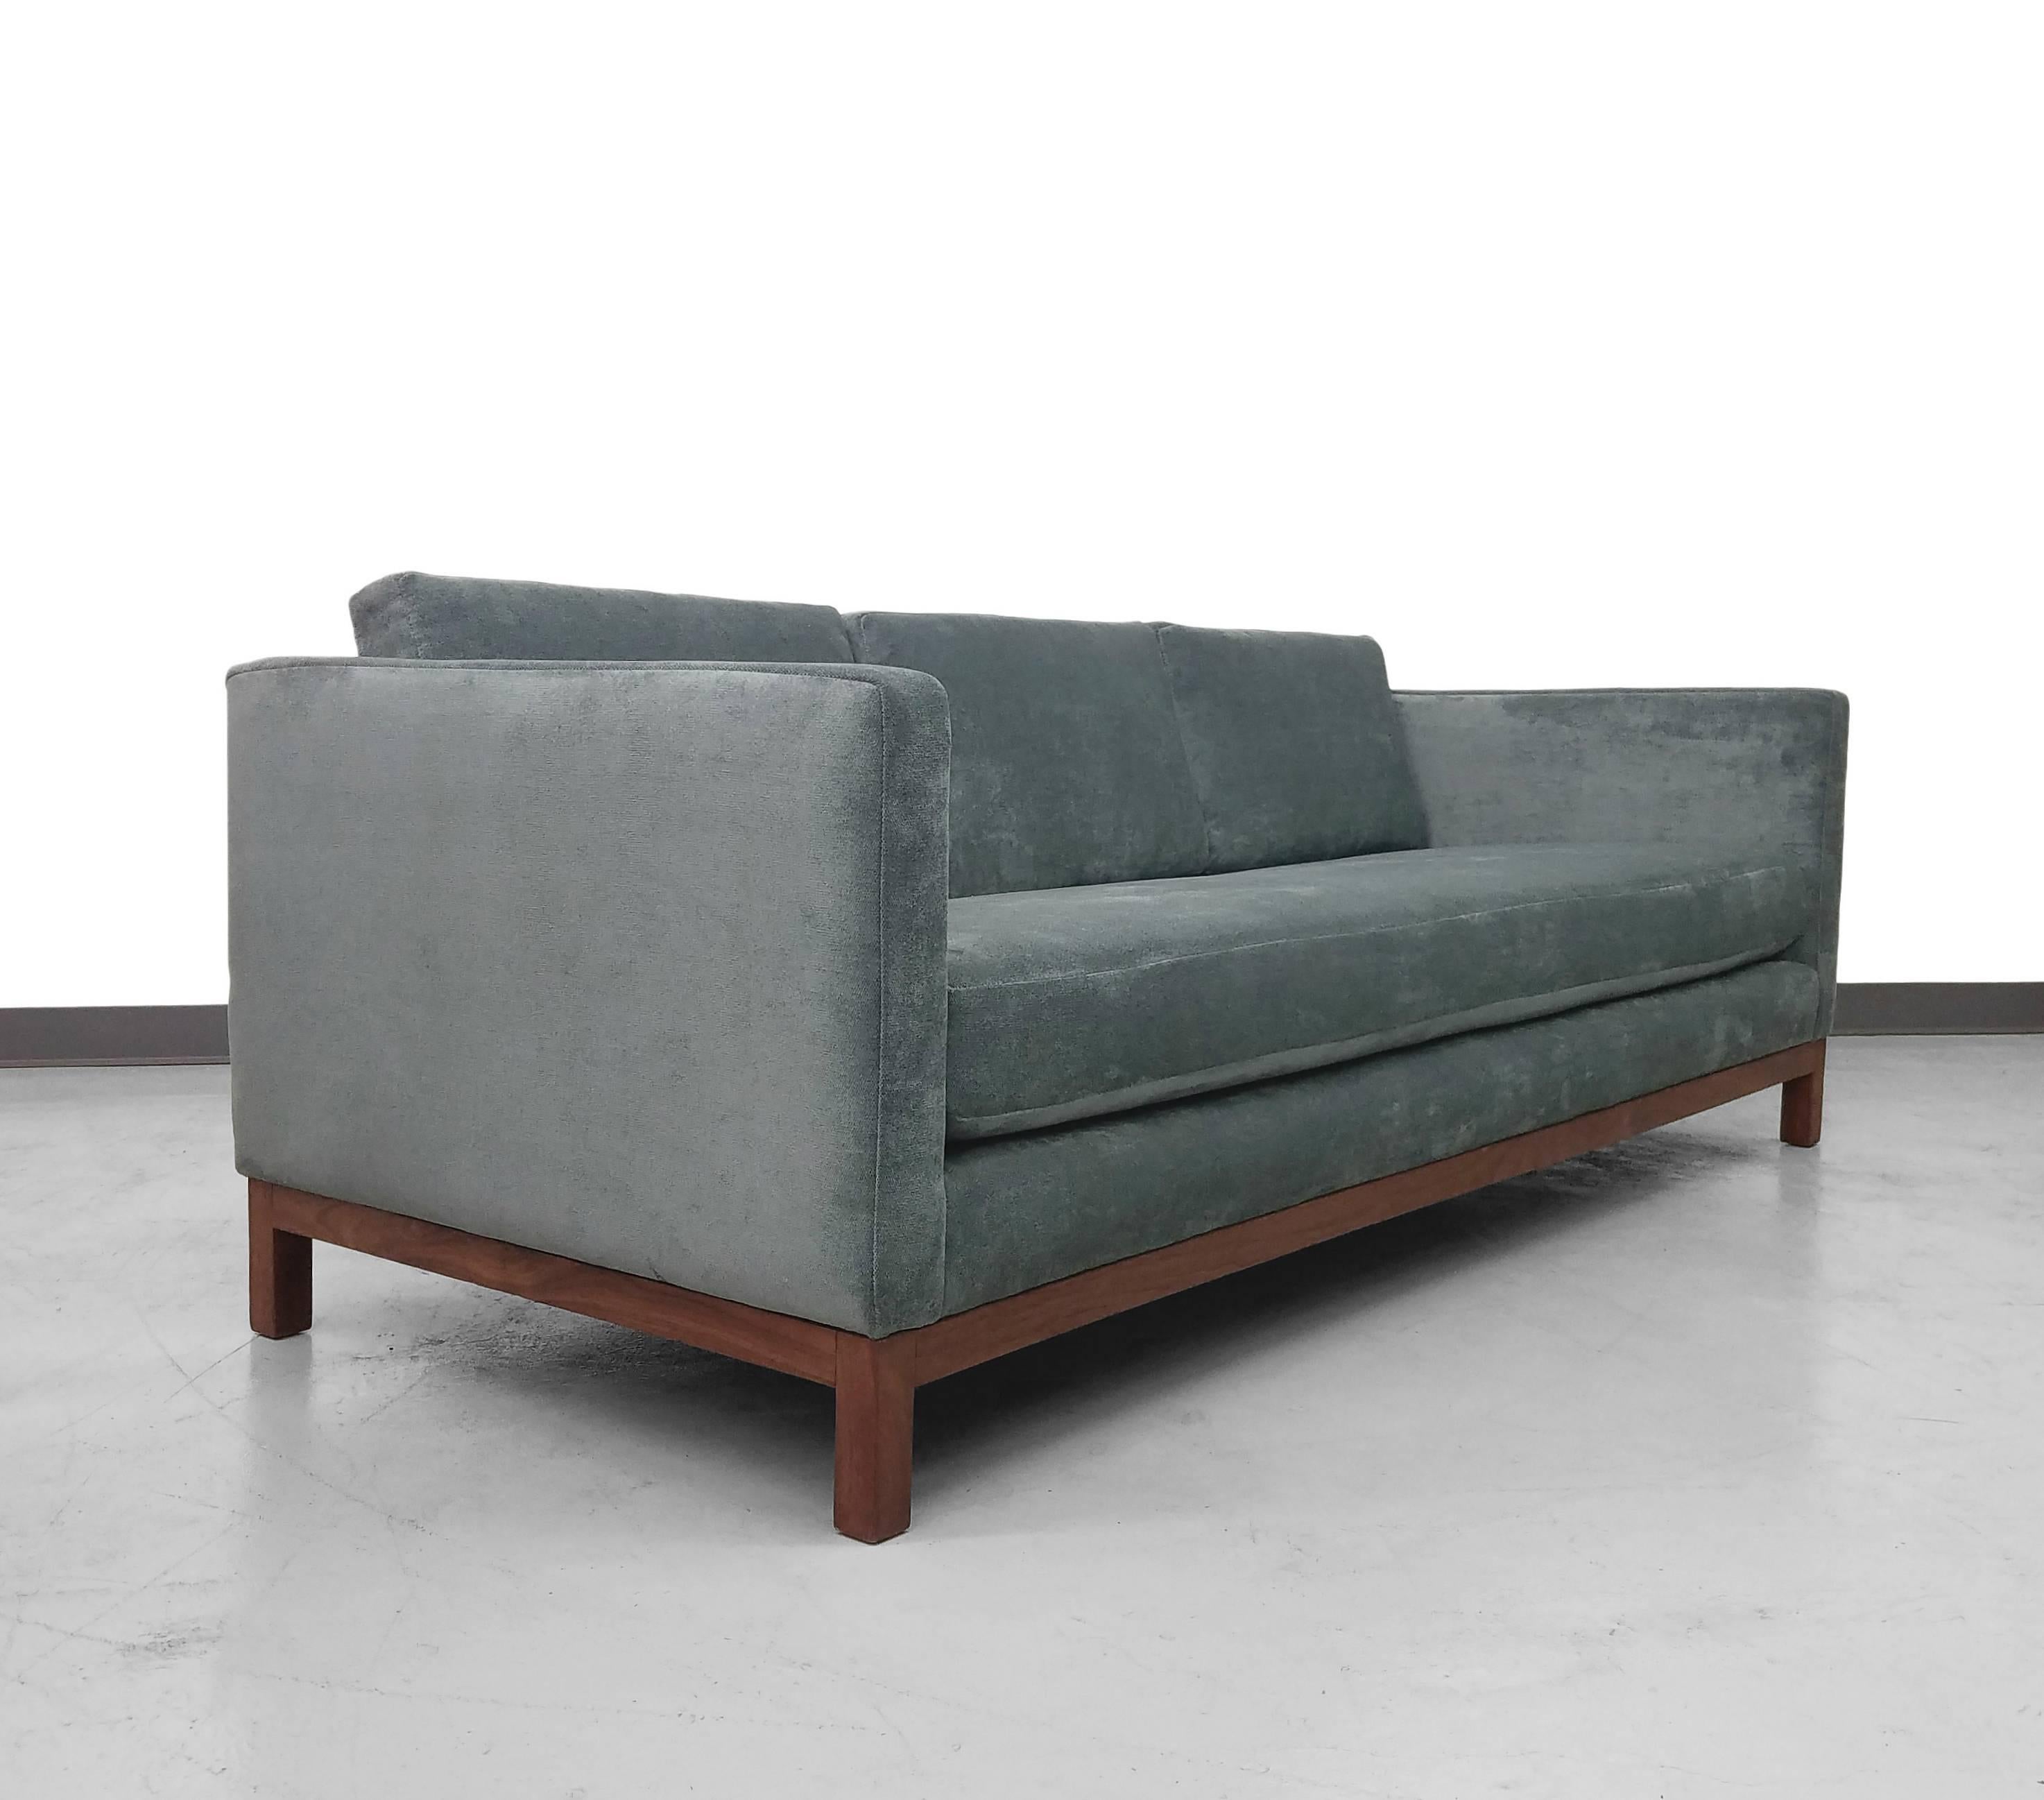 Beautiful Mid-Century tuxedo style sofa by Milo Baughman. Sofa floats on a beautiful walnut base that gorgeously contrasts the deep blue green fabric. Simple, classic lines and details make this the perfectly understated statement piece. Newly